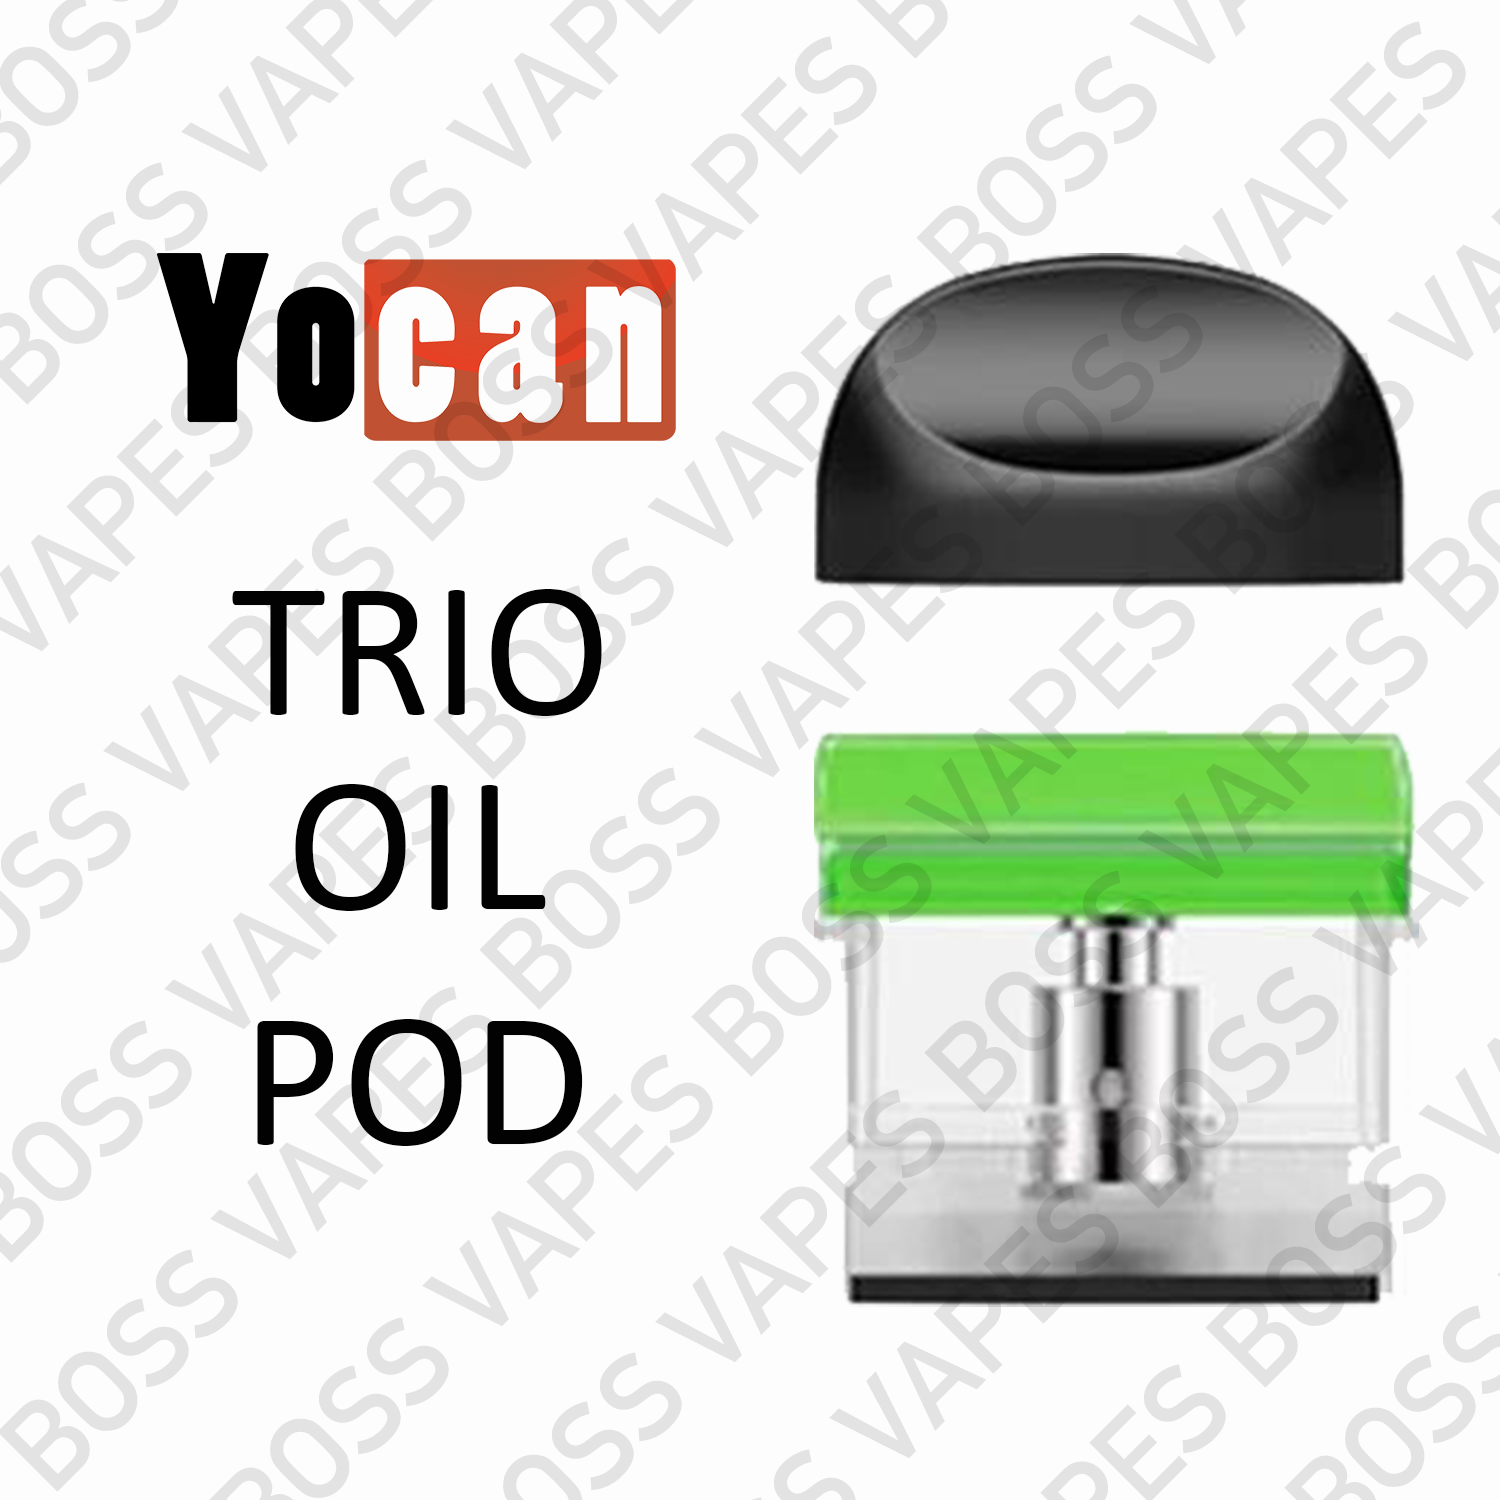 YOCAN TRIO REPLACEMENT POD (PODS PRICED INDIVIDUALLY) - Boss Vapes